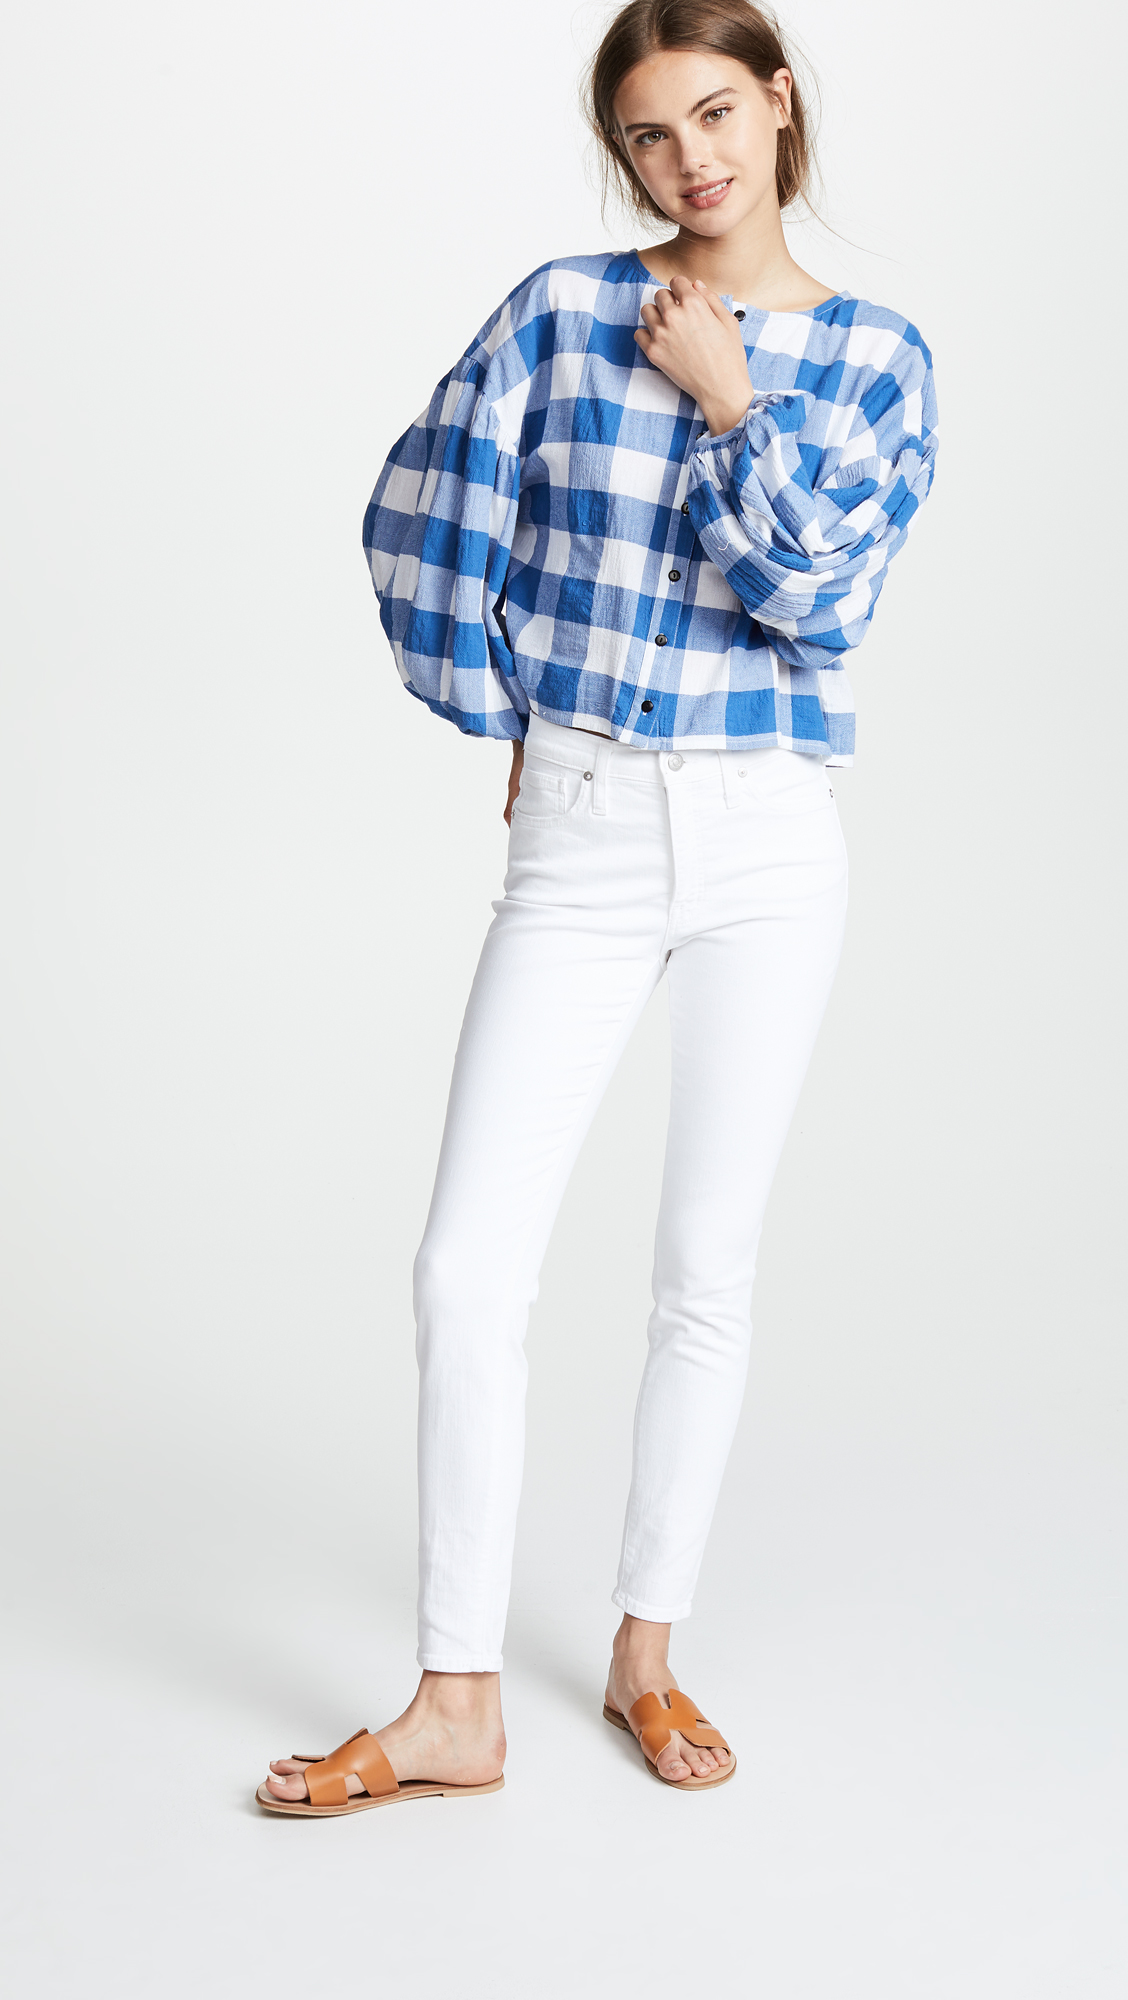 White Madewell Jeans Blue Gingham Top